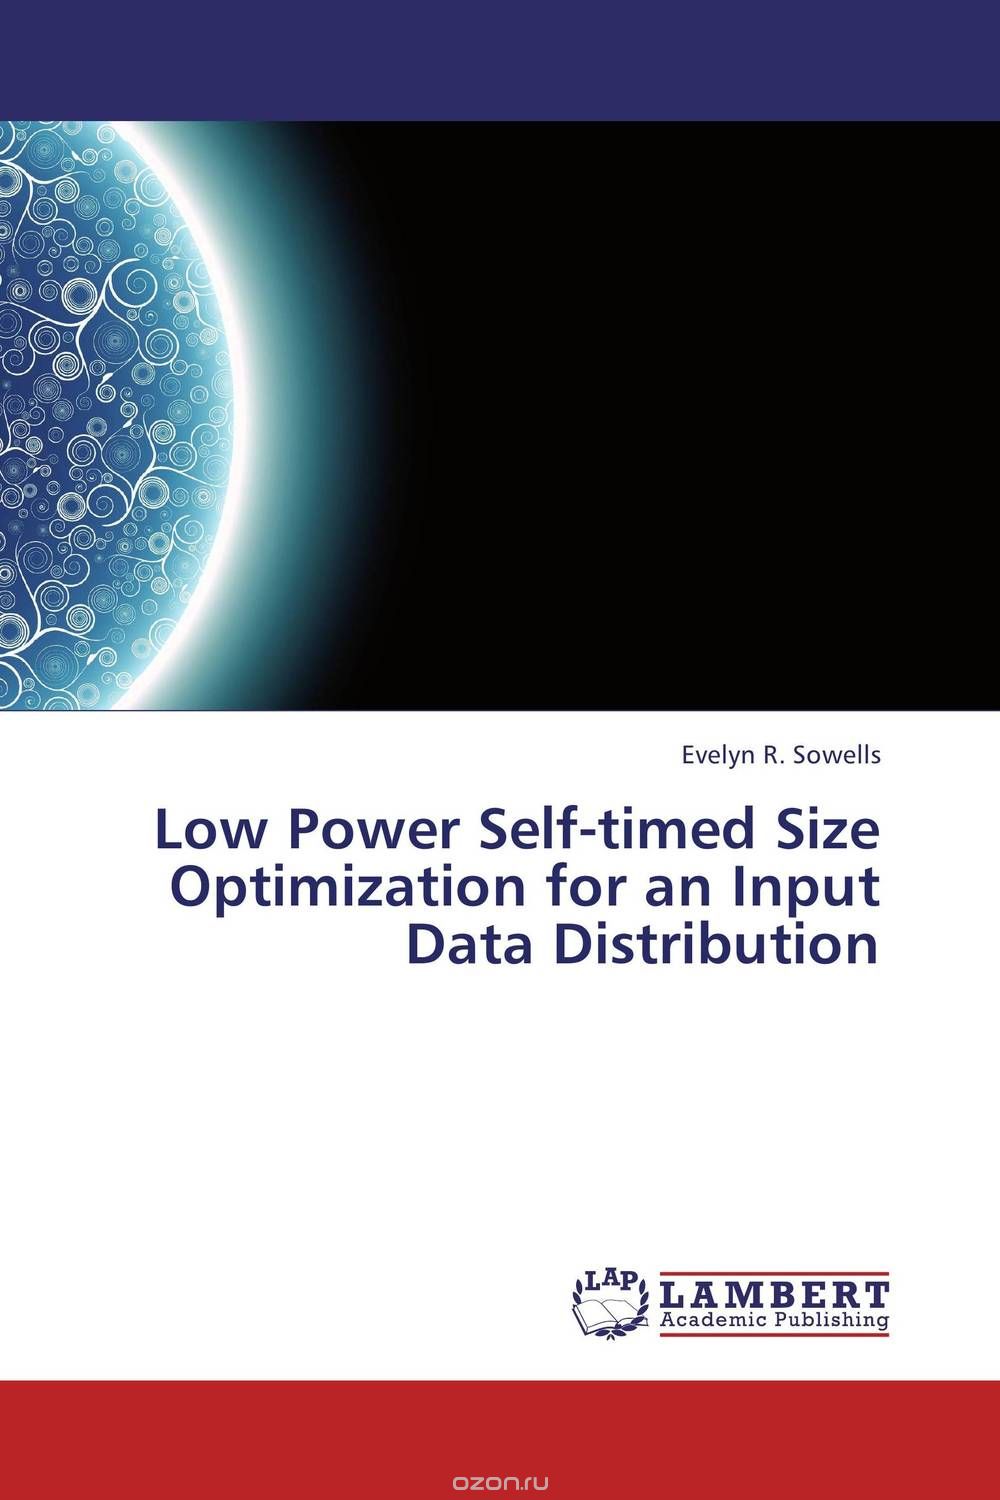 Low Power Self-timed Size Optimization for an Input Data Distribution